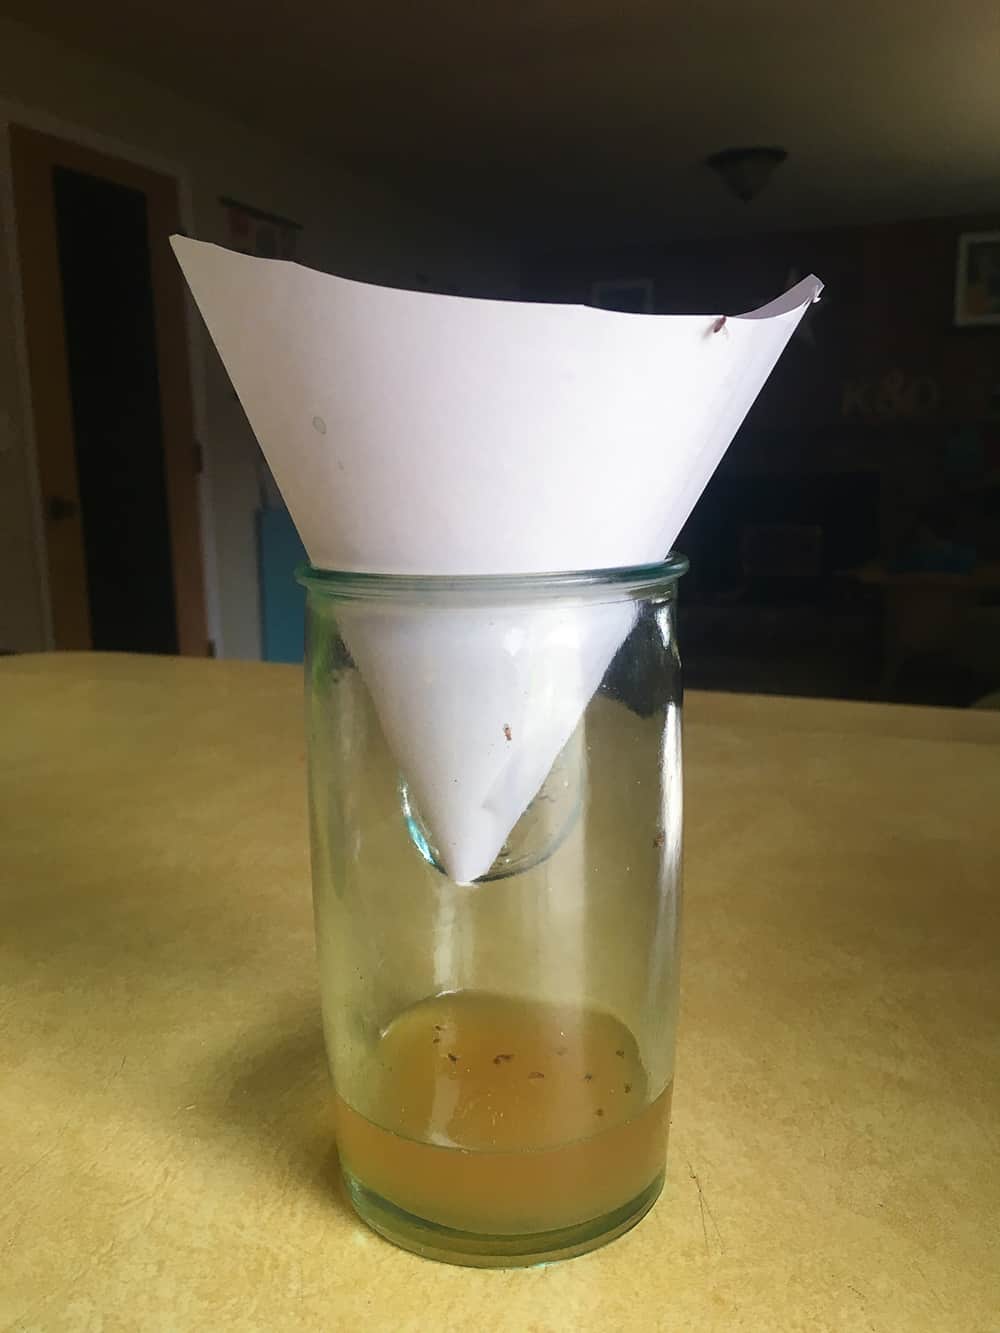 apple cider vinegar and a paper funnel inserted into a cup are used as an at home fruit fly trap